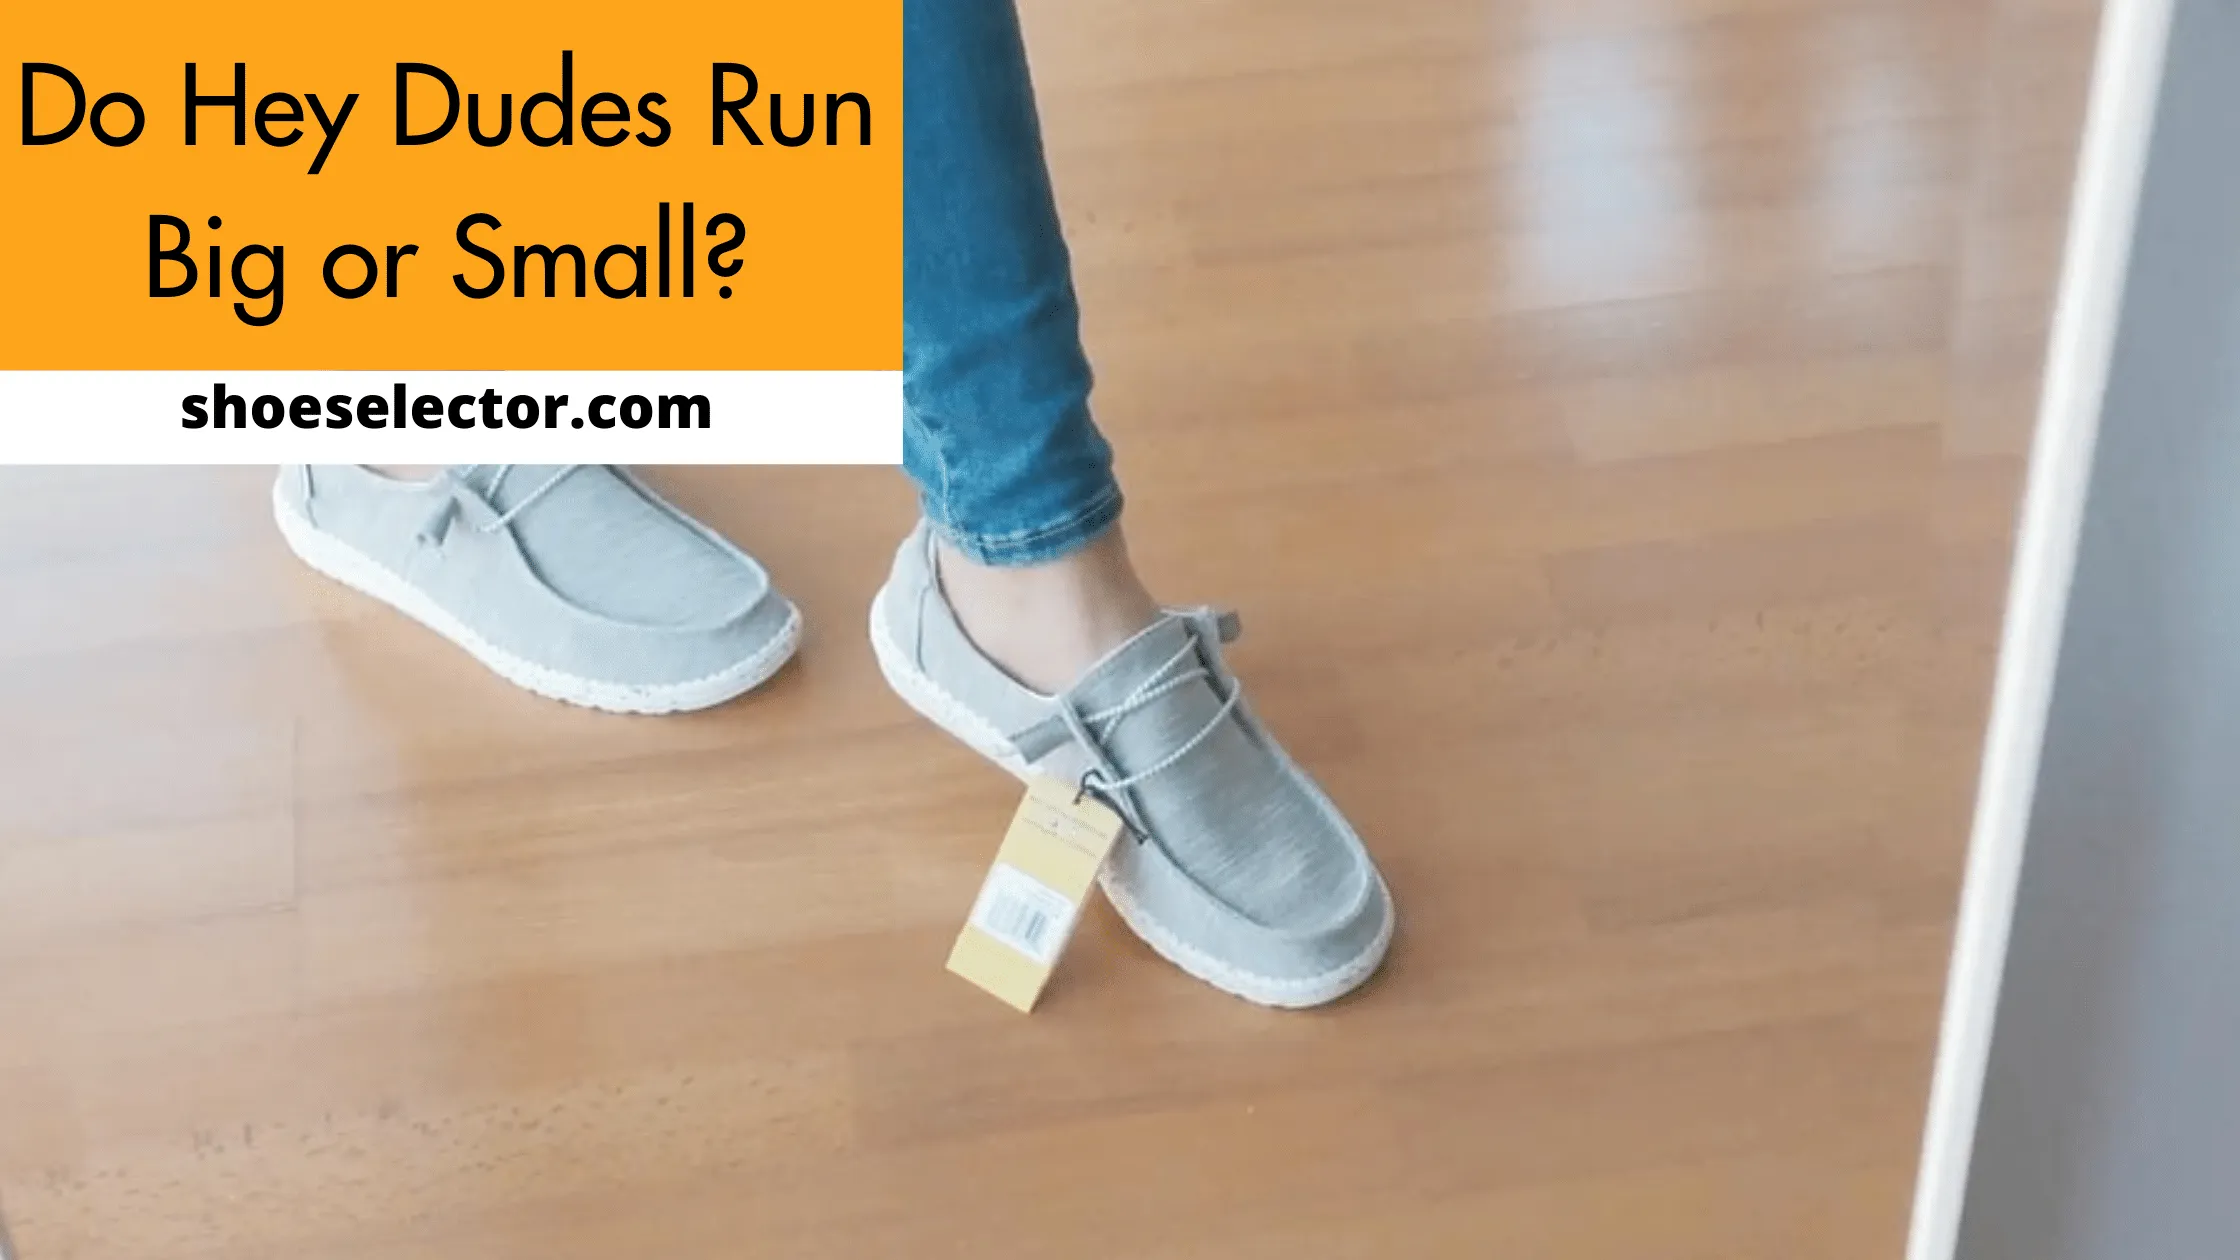 Do Hey Dudes Run Big or Small? - Quick Guide